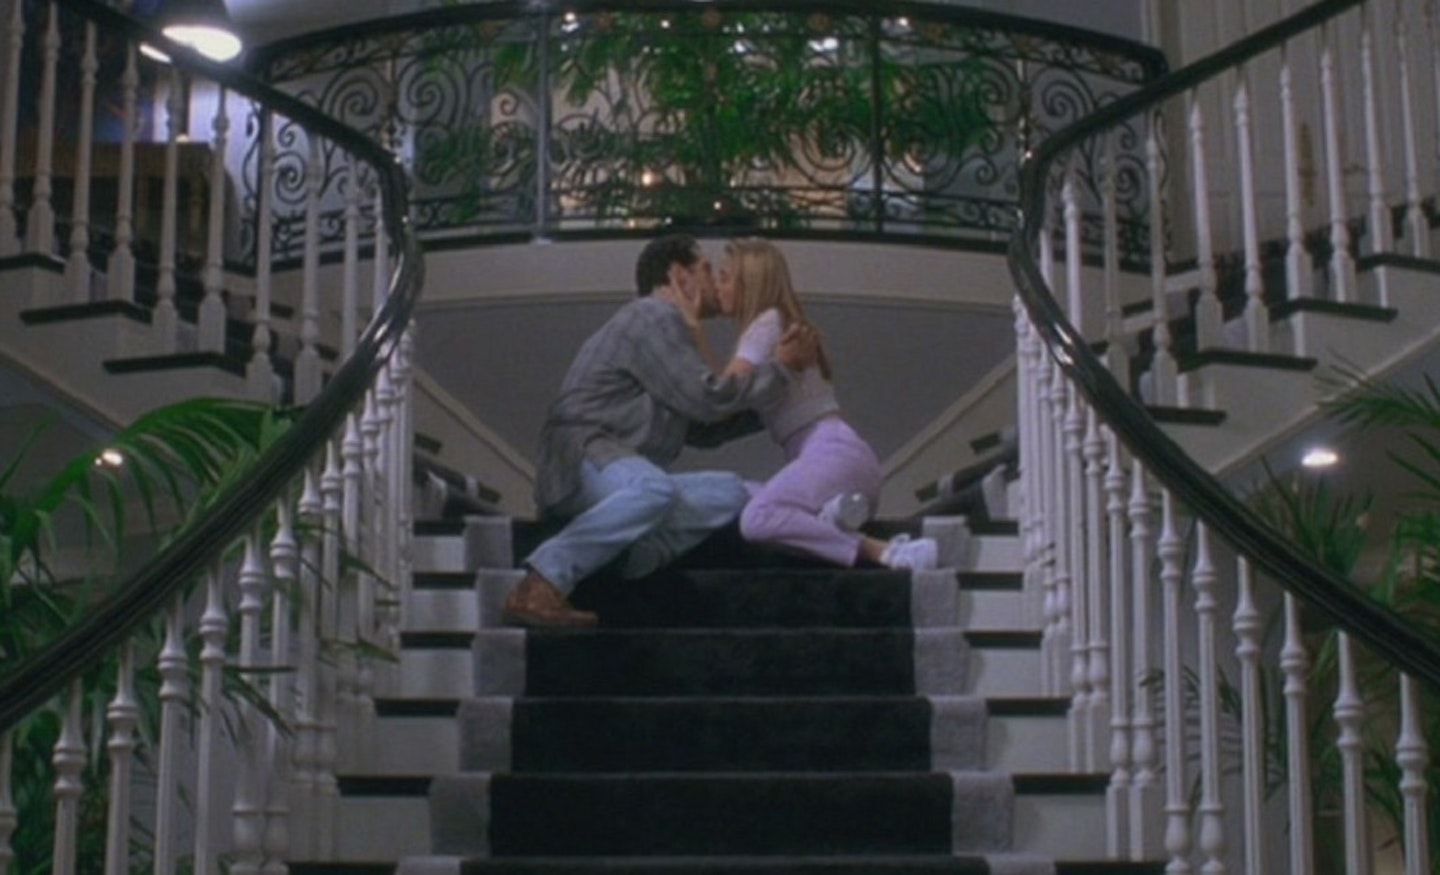 Cher-Josh-in-Clueless-movie-couples-20203551-1280-720